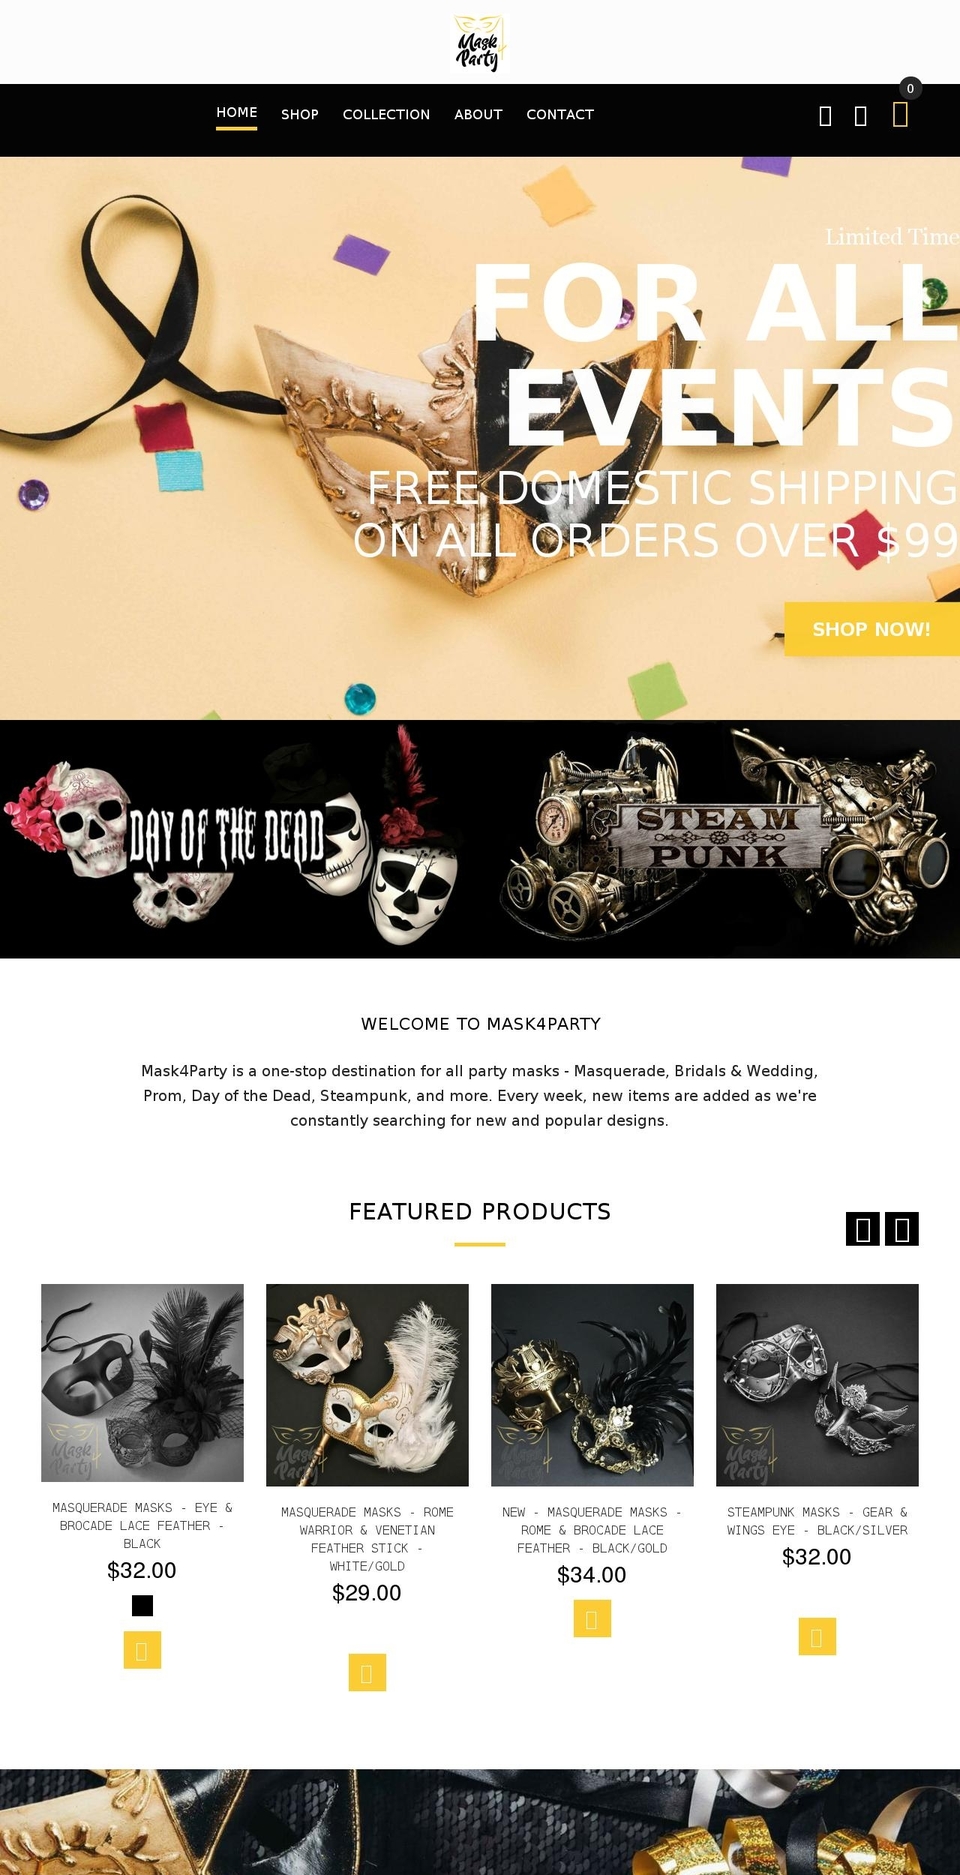 yourstore-v2-1-5 Shopify theme site example mask4party.com